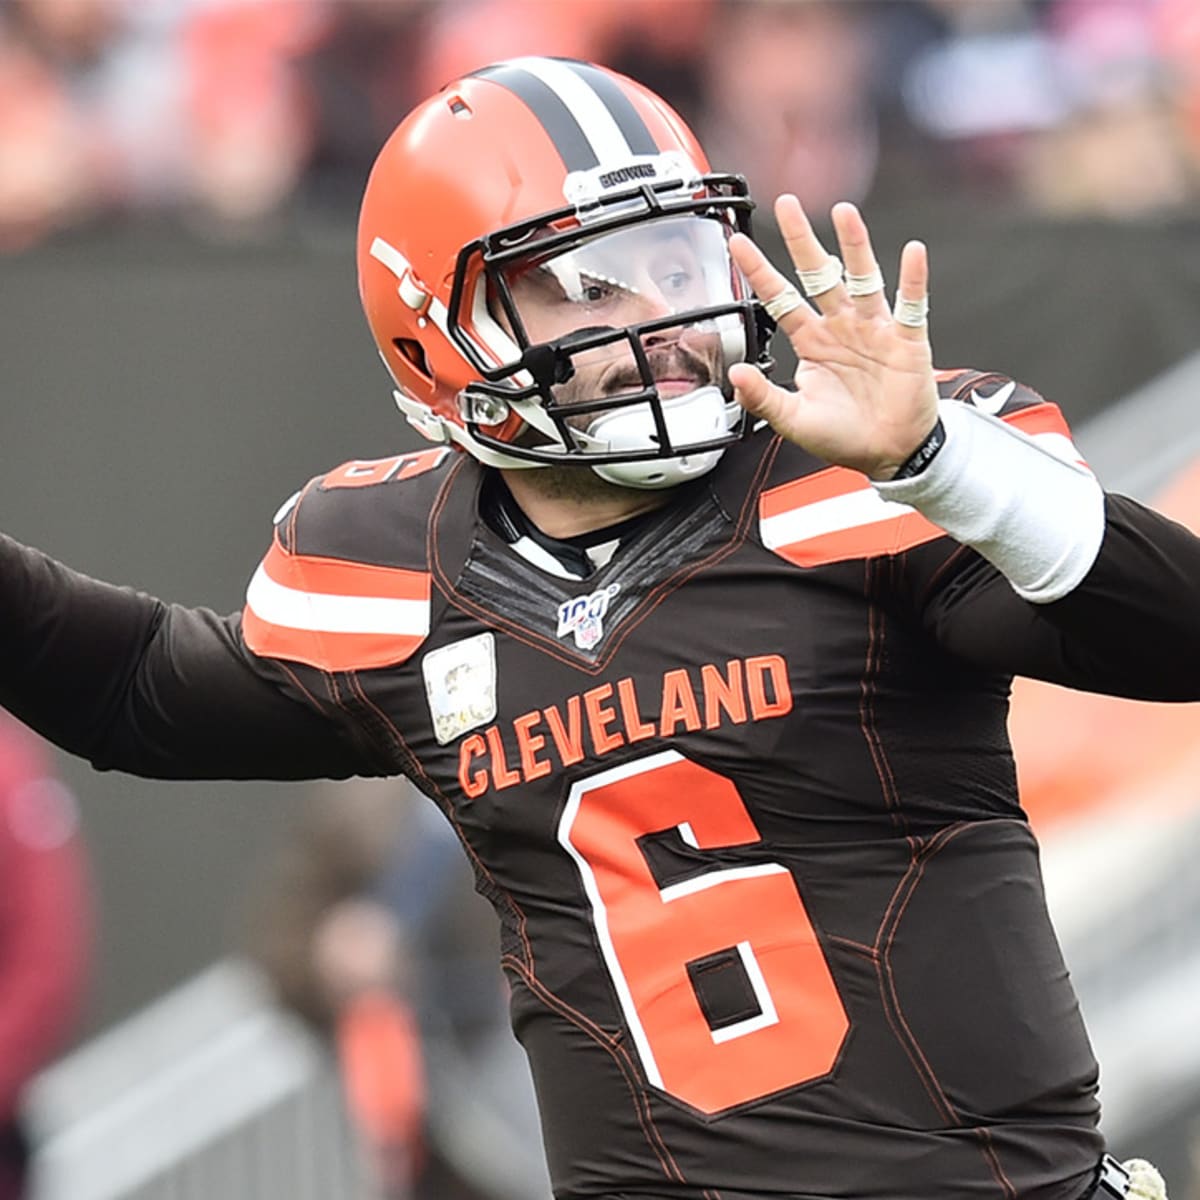 Steelers vs Browns live stream: Watch online, TV channel, time